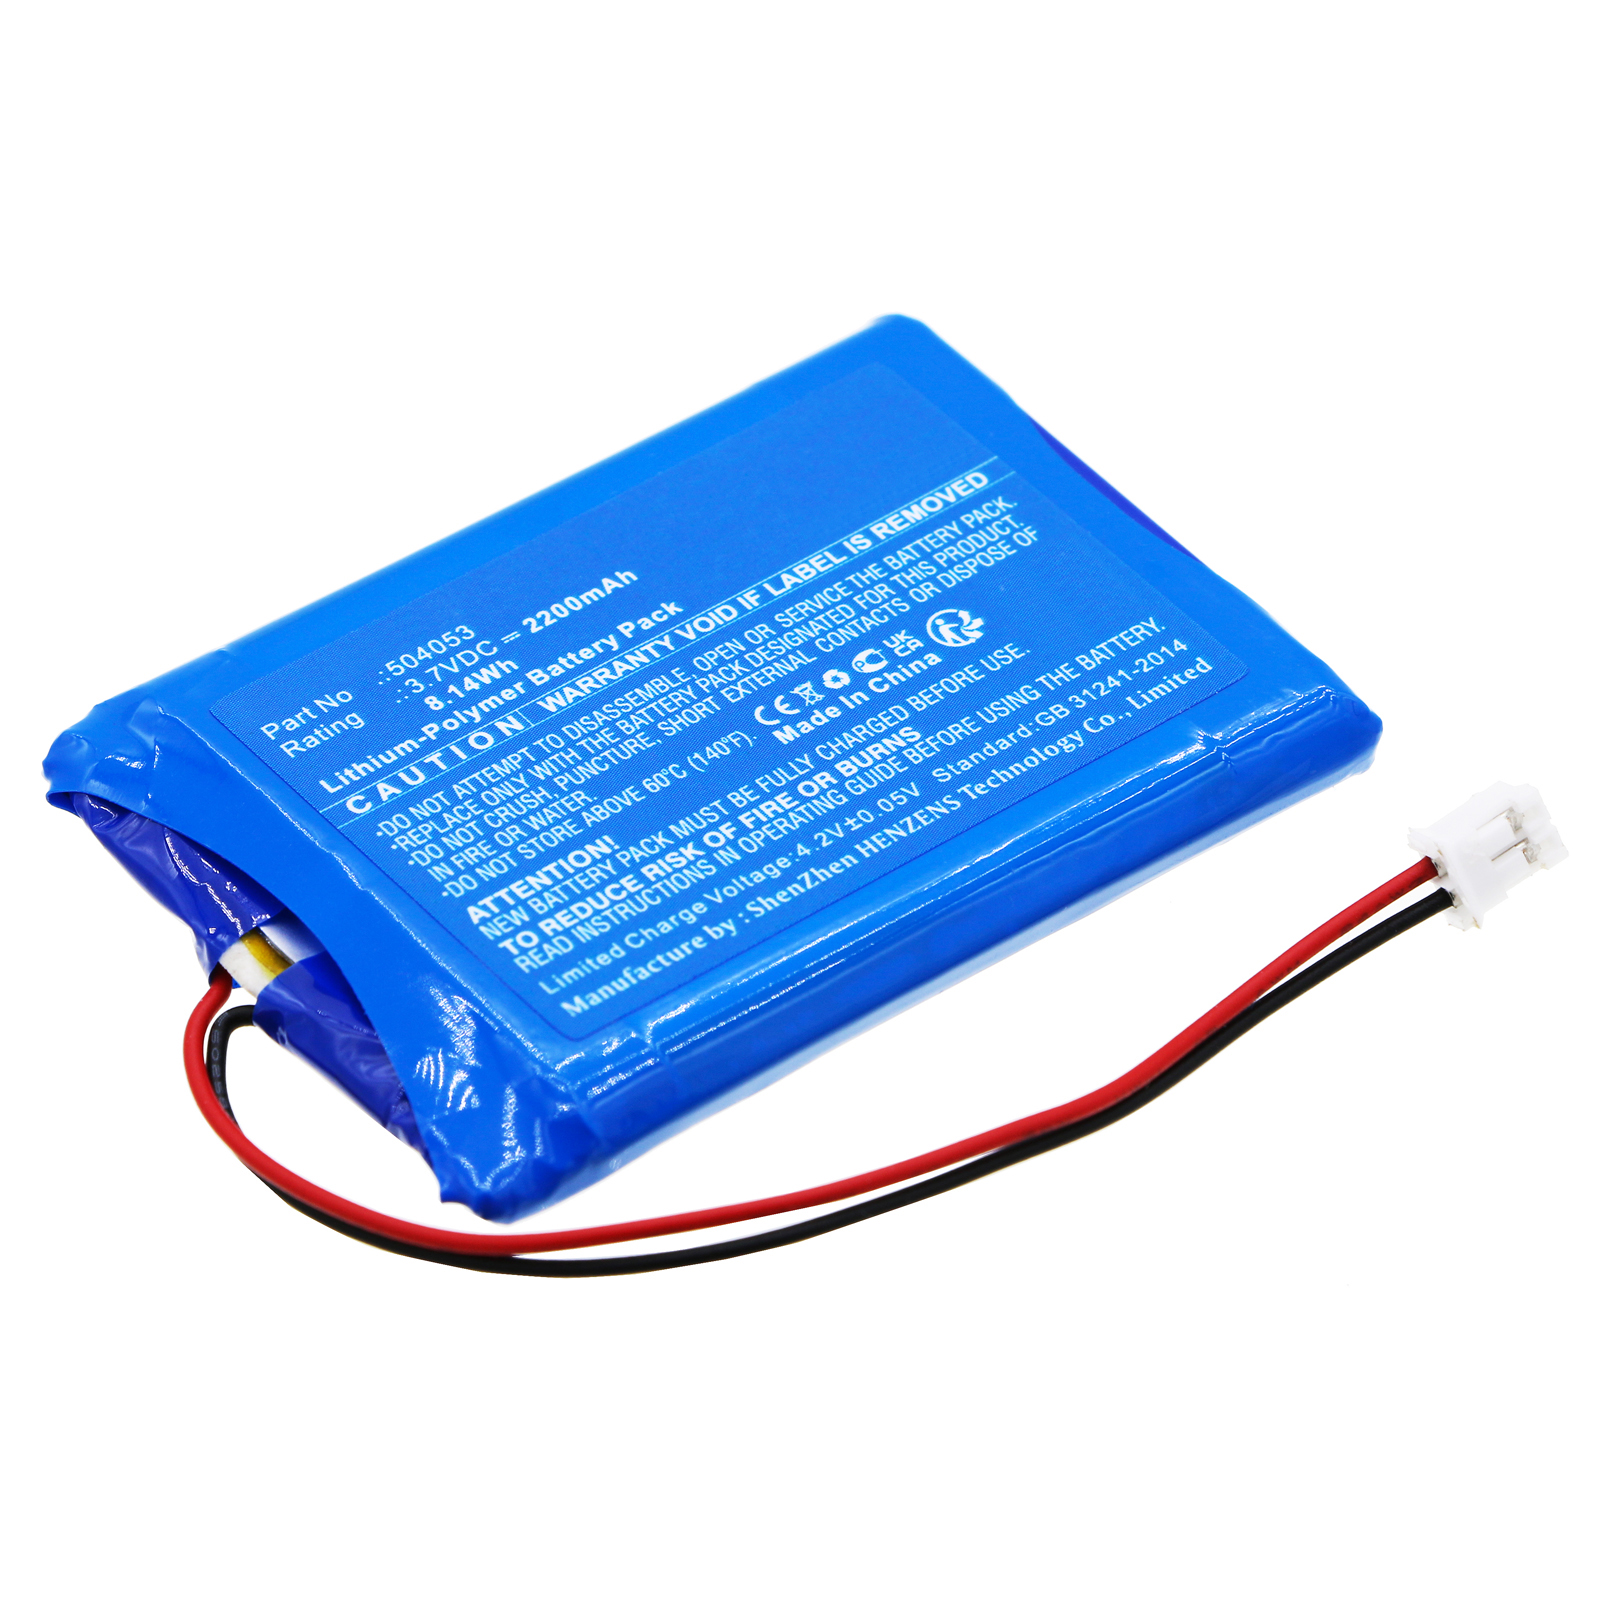 Synergy Digital Equipment Battery, Compatible with Drager 2450-3004 Equipment Battery (Li-Pol, 3.7V, 2200mAh)